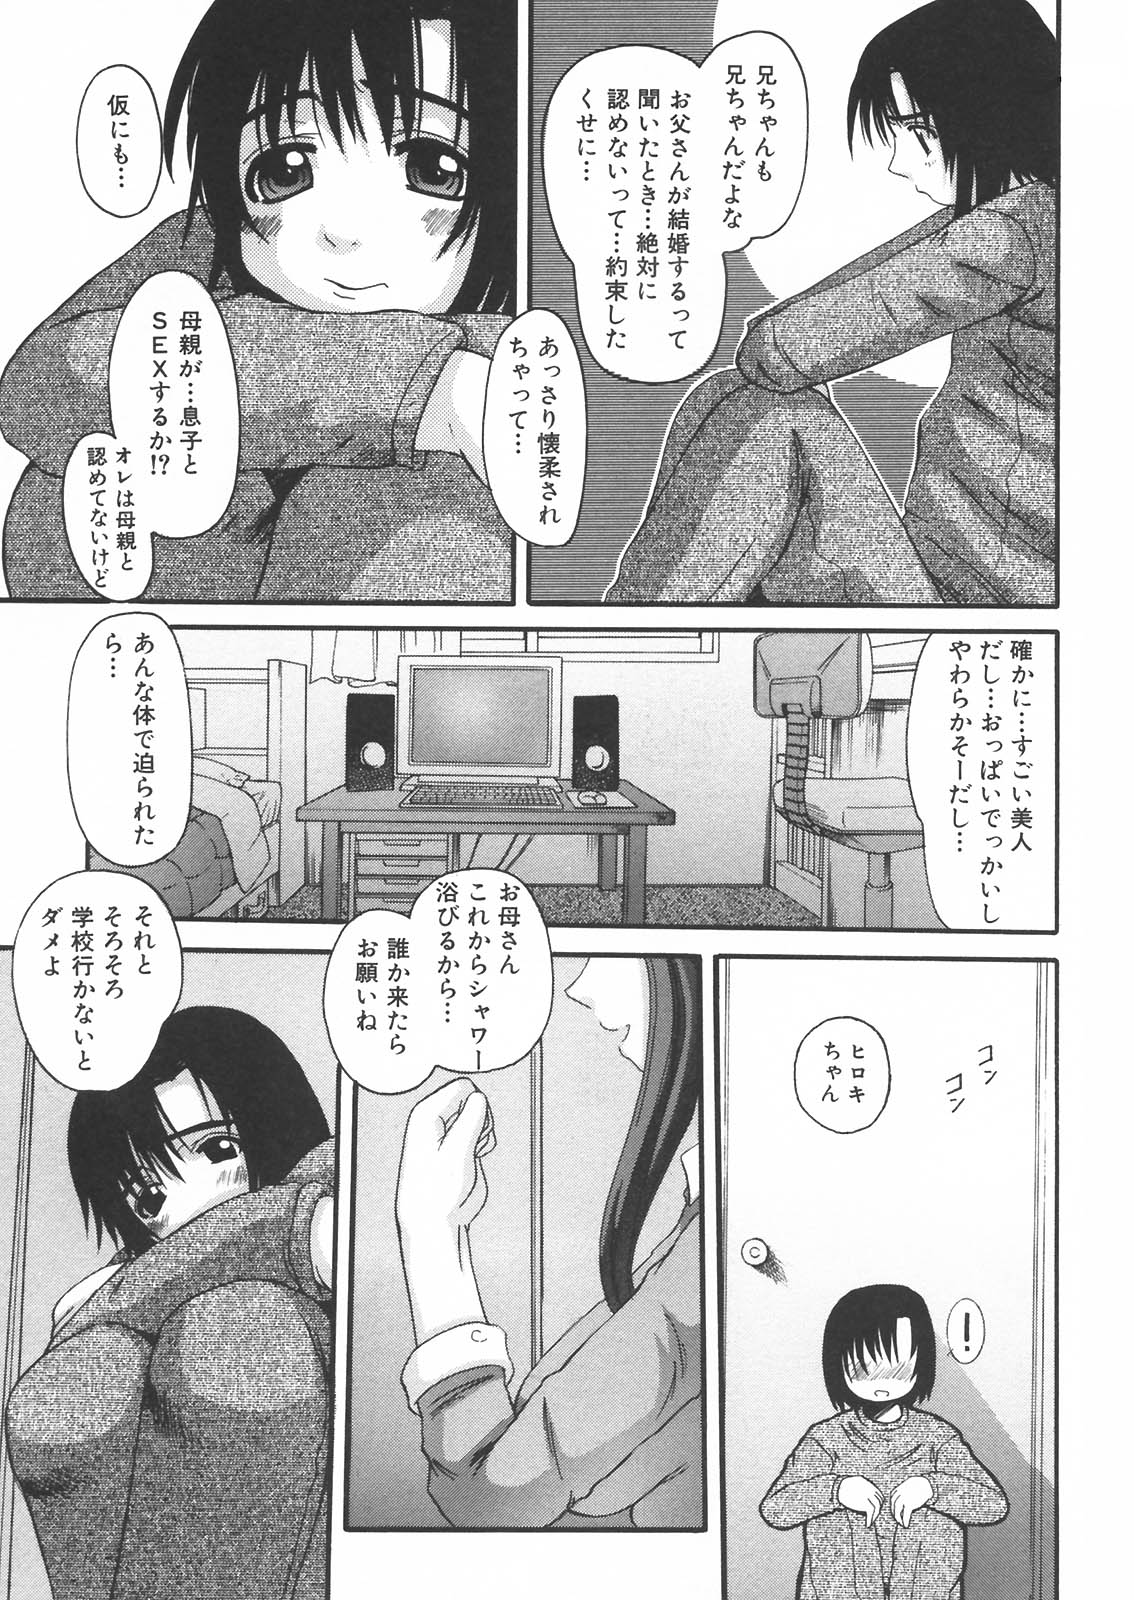 [Anthology] Haha to Ko no Inya - Mother's and son's indecent night - page 11 full